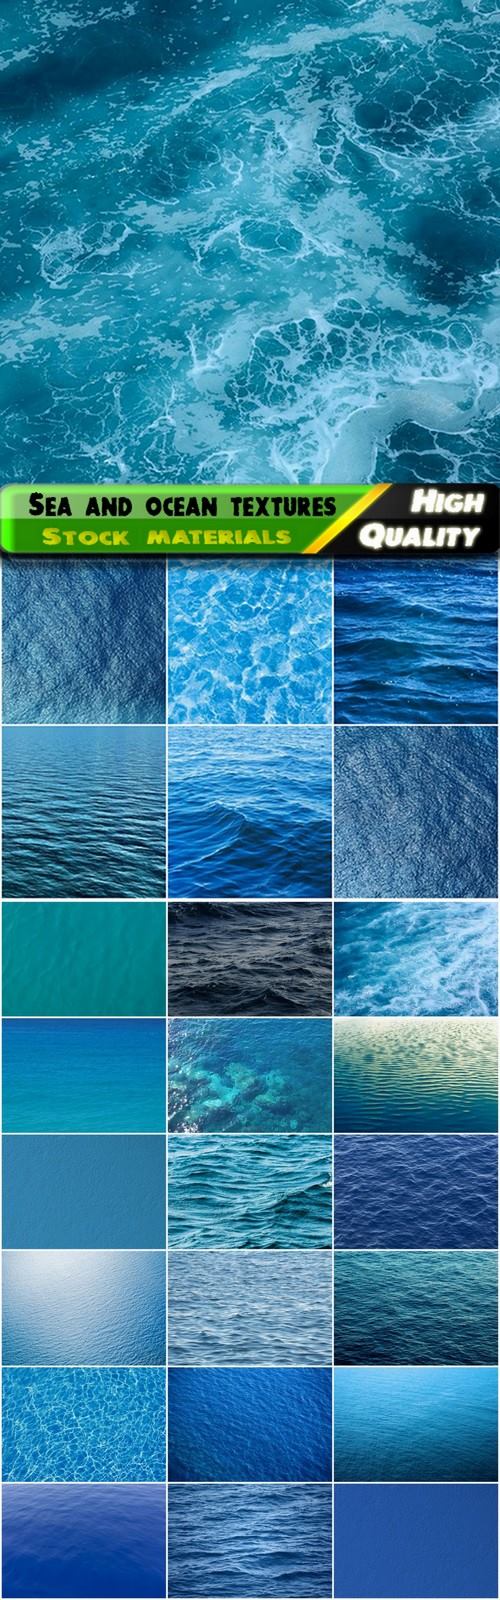 Sea waves and ocean textures and backgrounds - 25 HQ Jpg